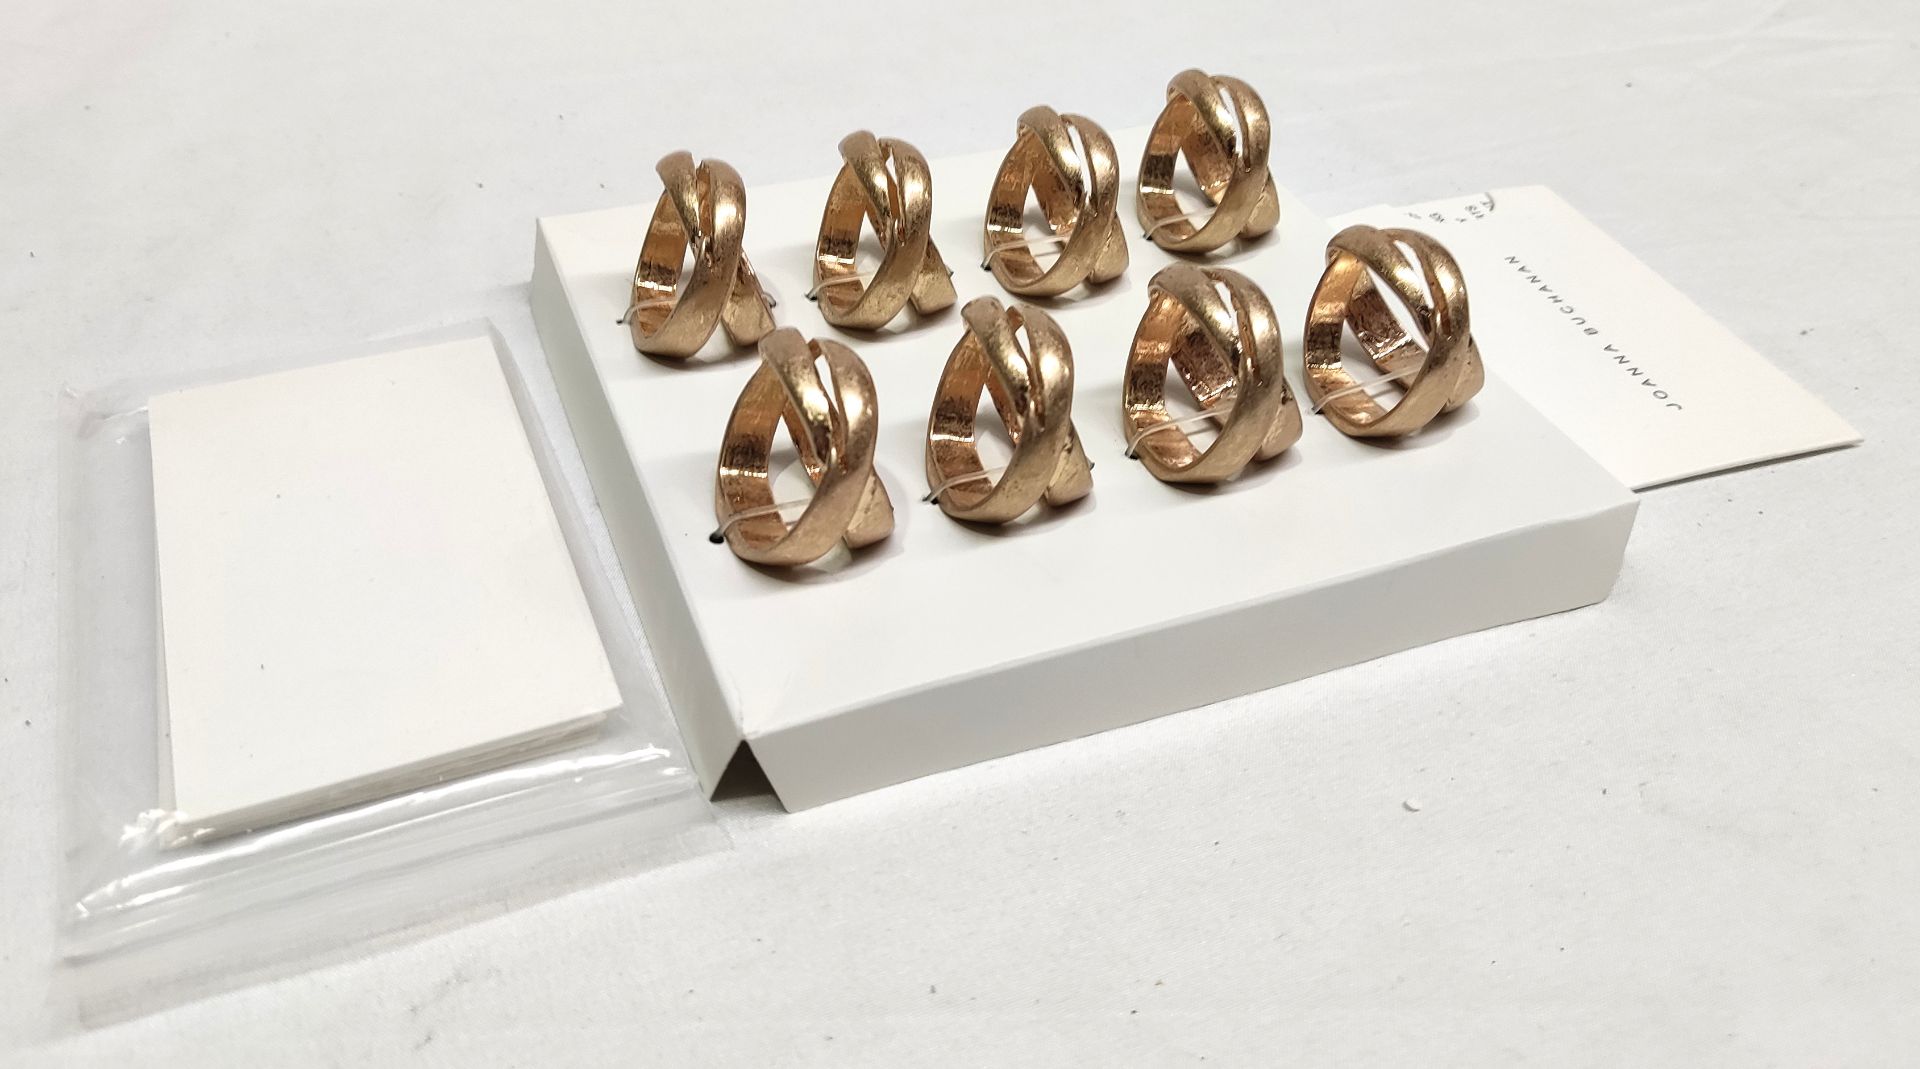 1 x JOANNA BUCHANAN Knot Placecard Holders - Set Of 8 - New/Boxed - Original RRP £168 - Ref: - Image 7 of 19